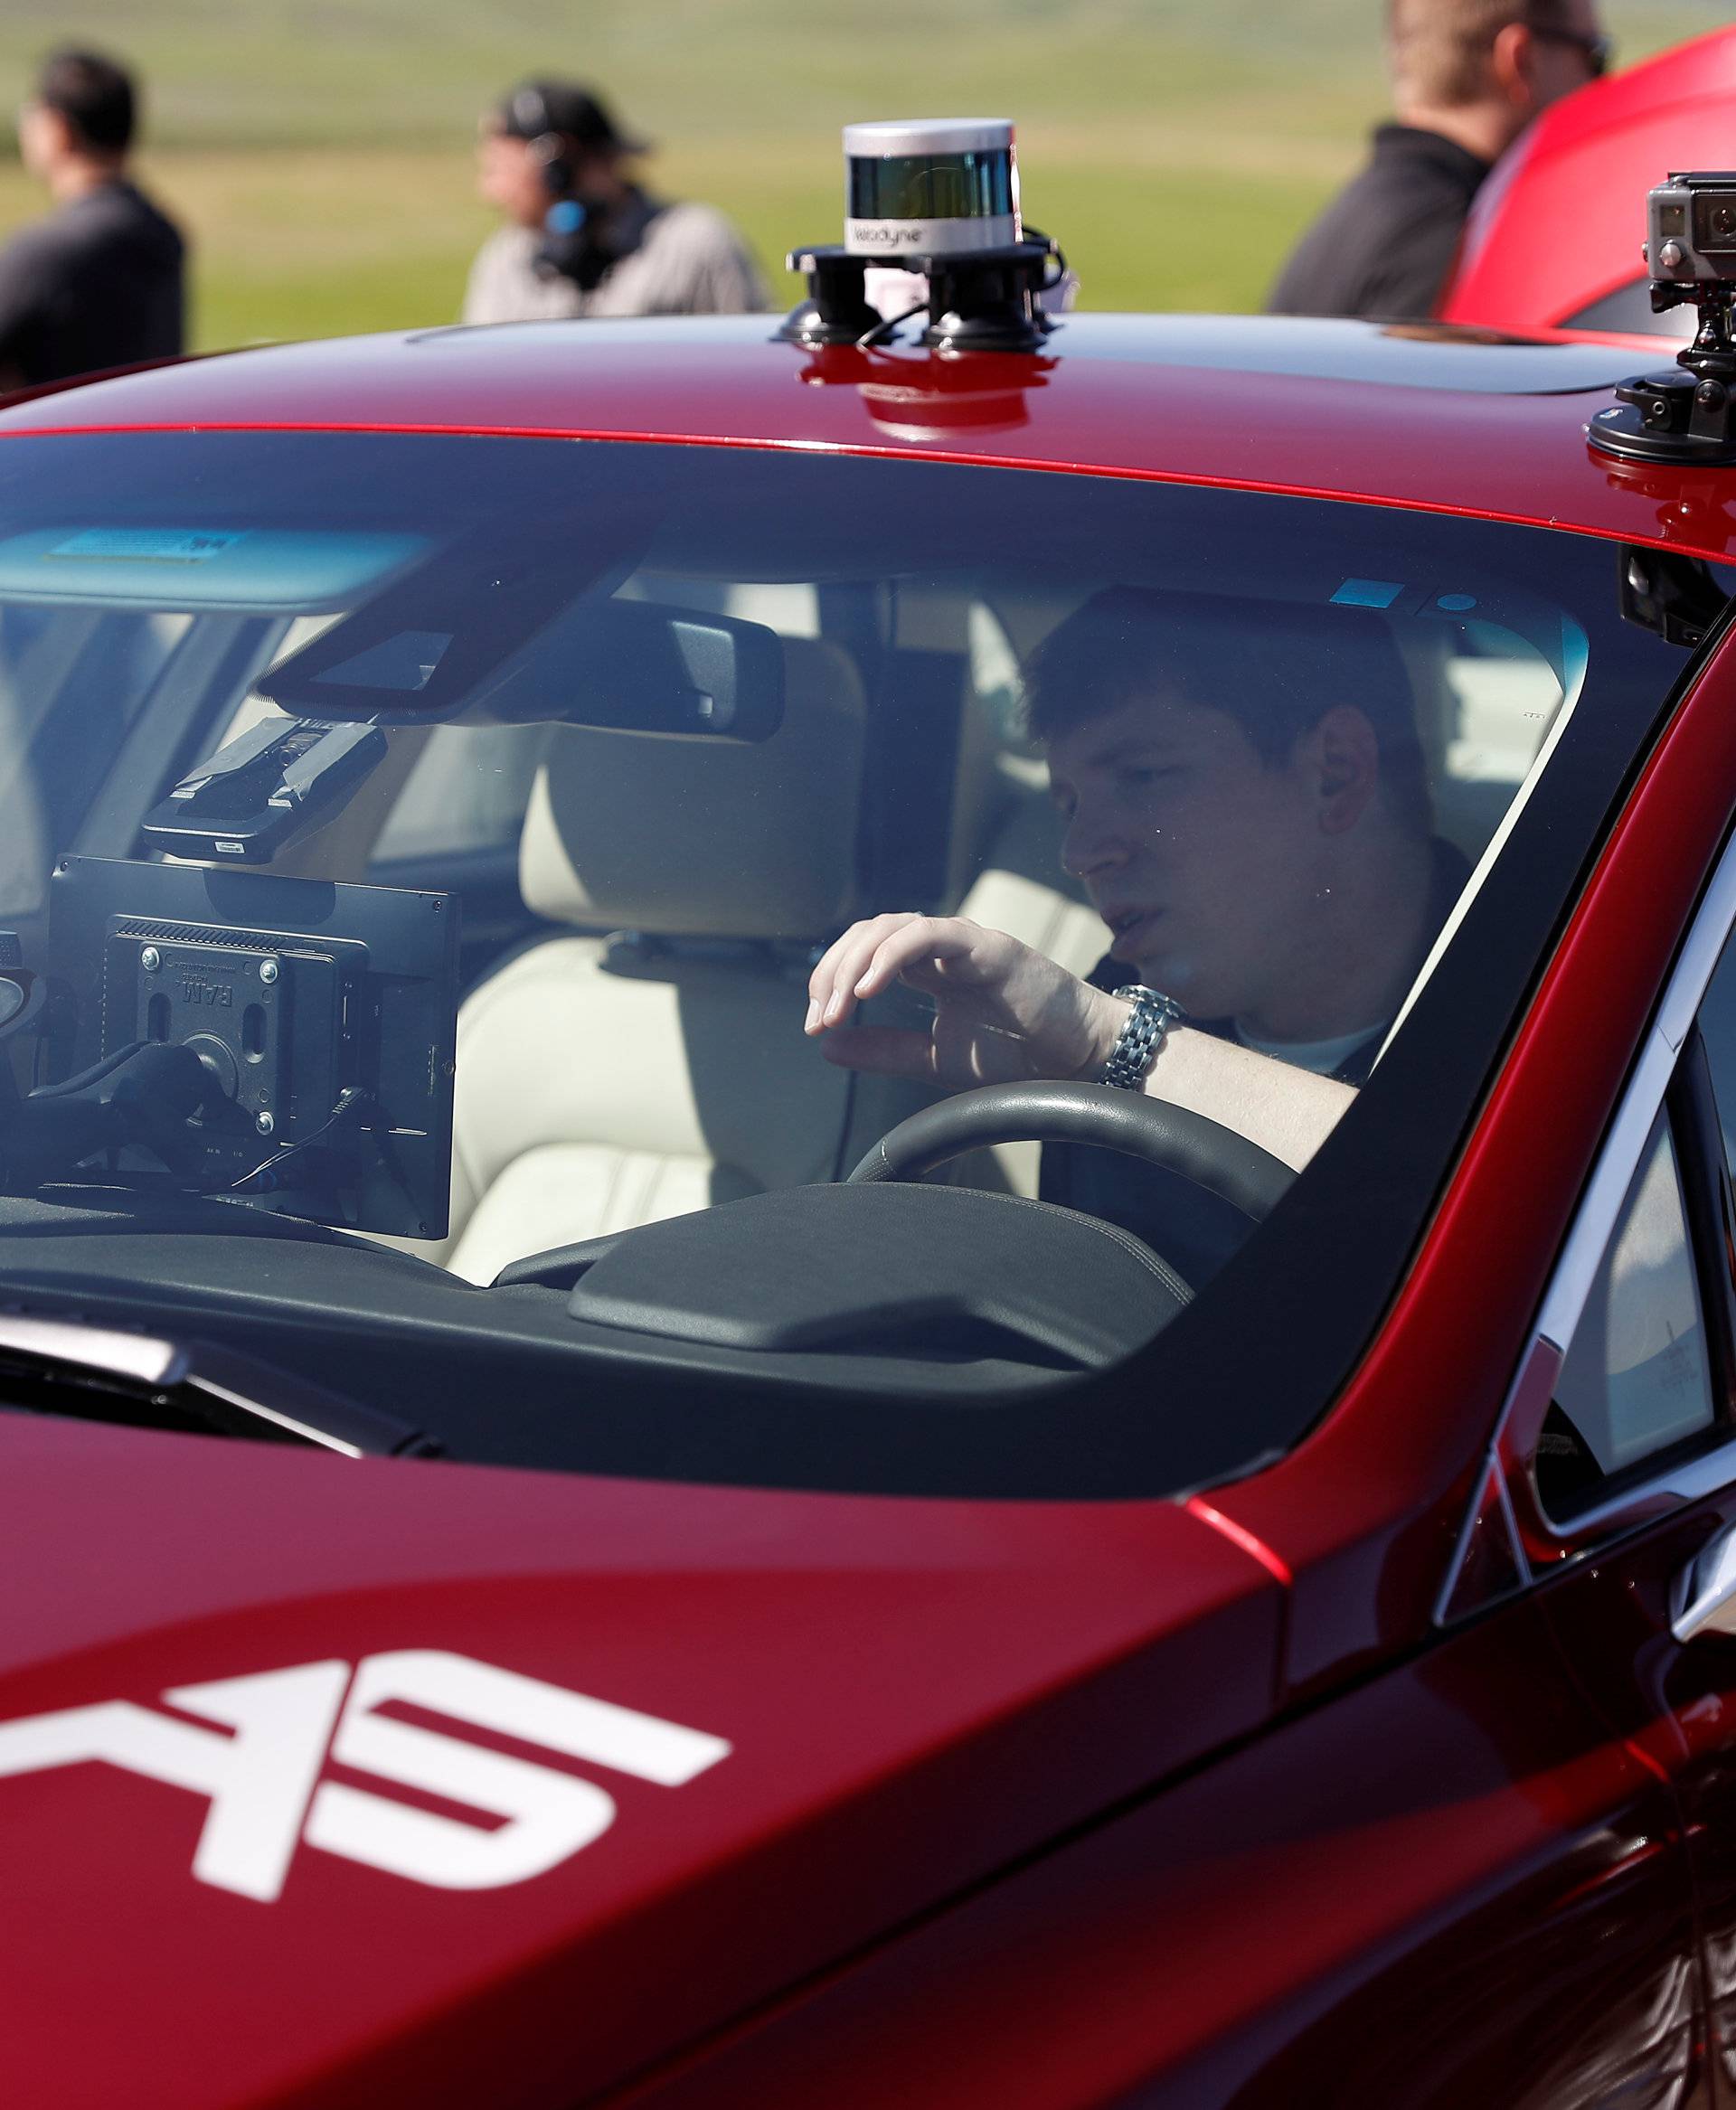 An engineer works on an AutonomouStuff Automated Research Development Vehicle during a self-racing cars event at Thunderhill Raceway in Willows, California